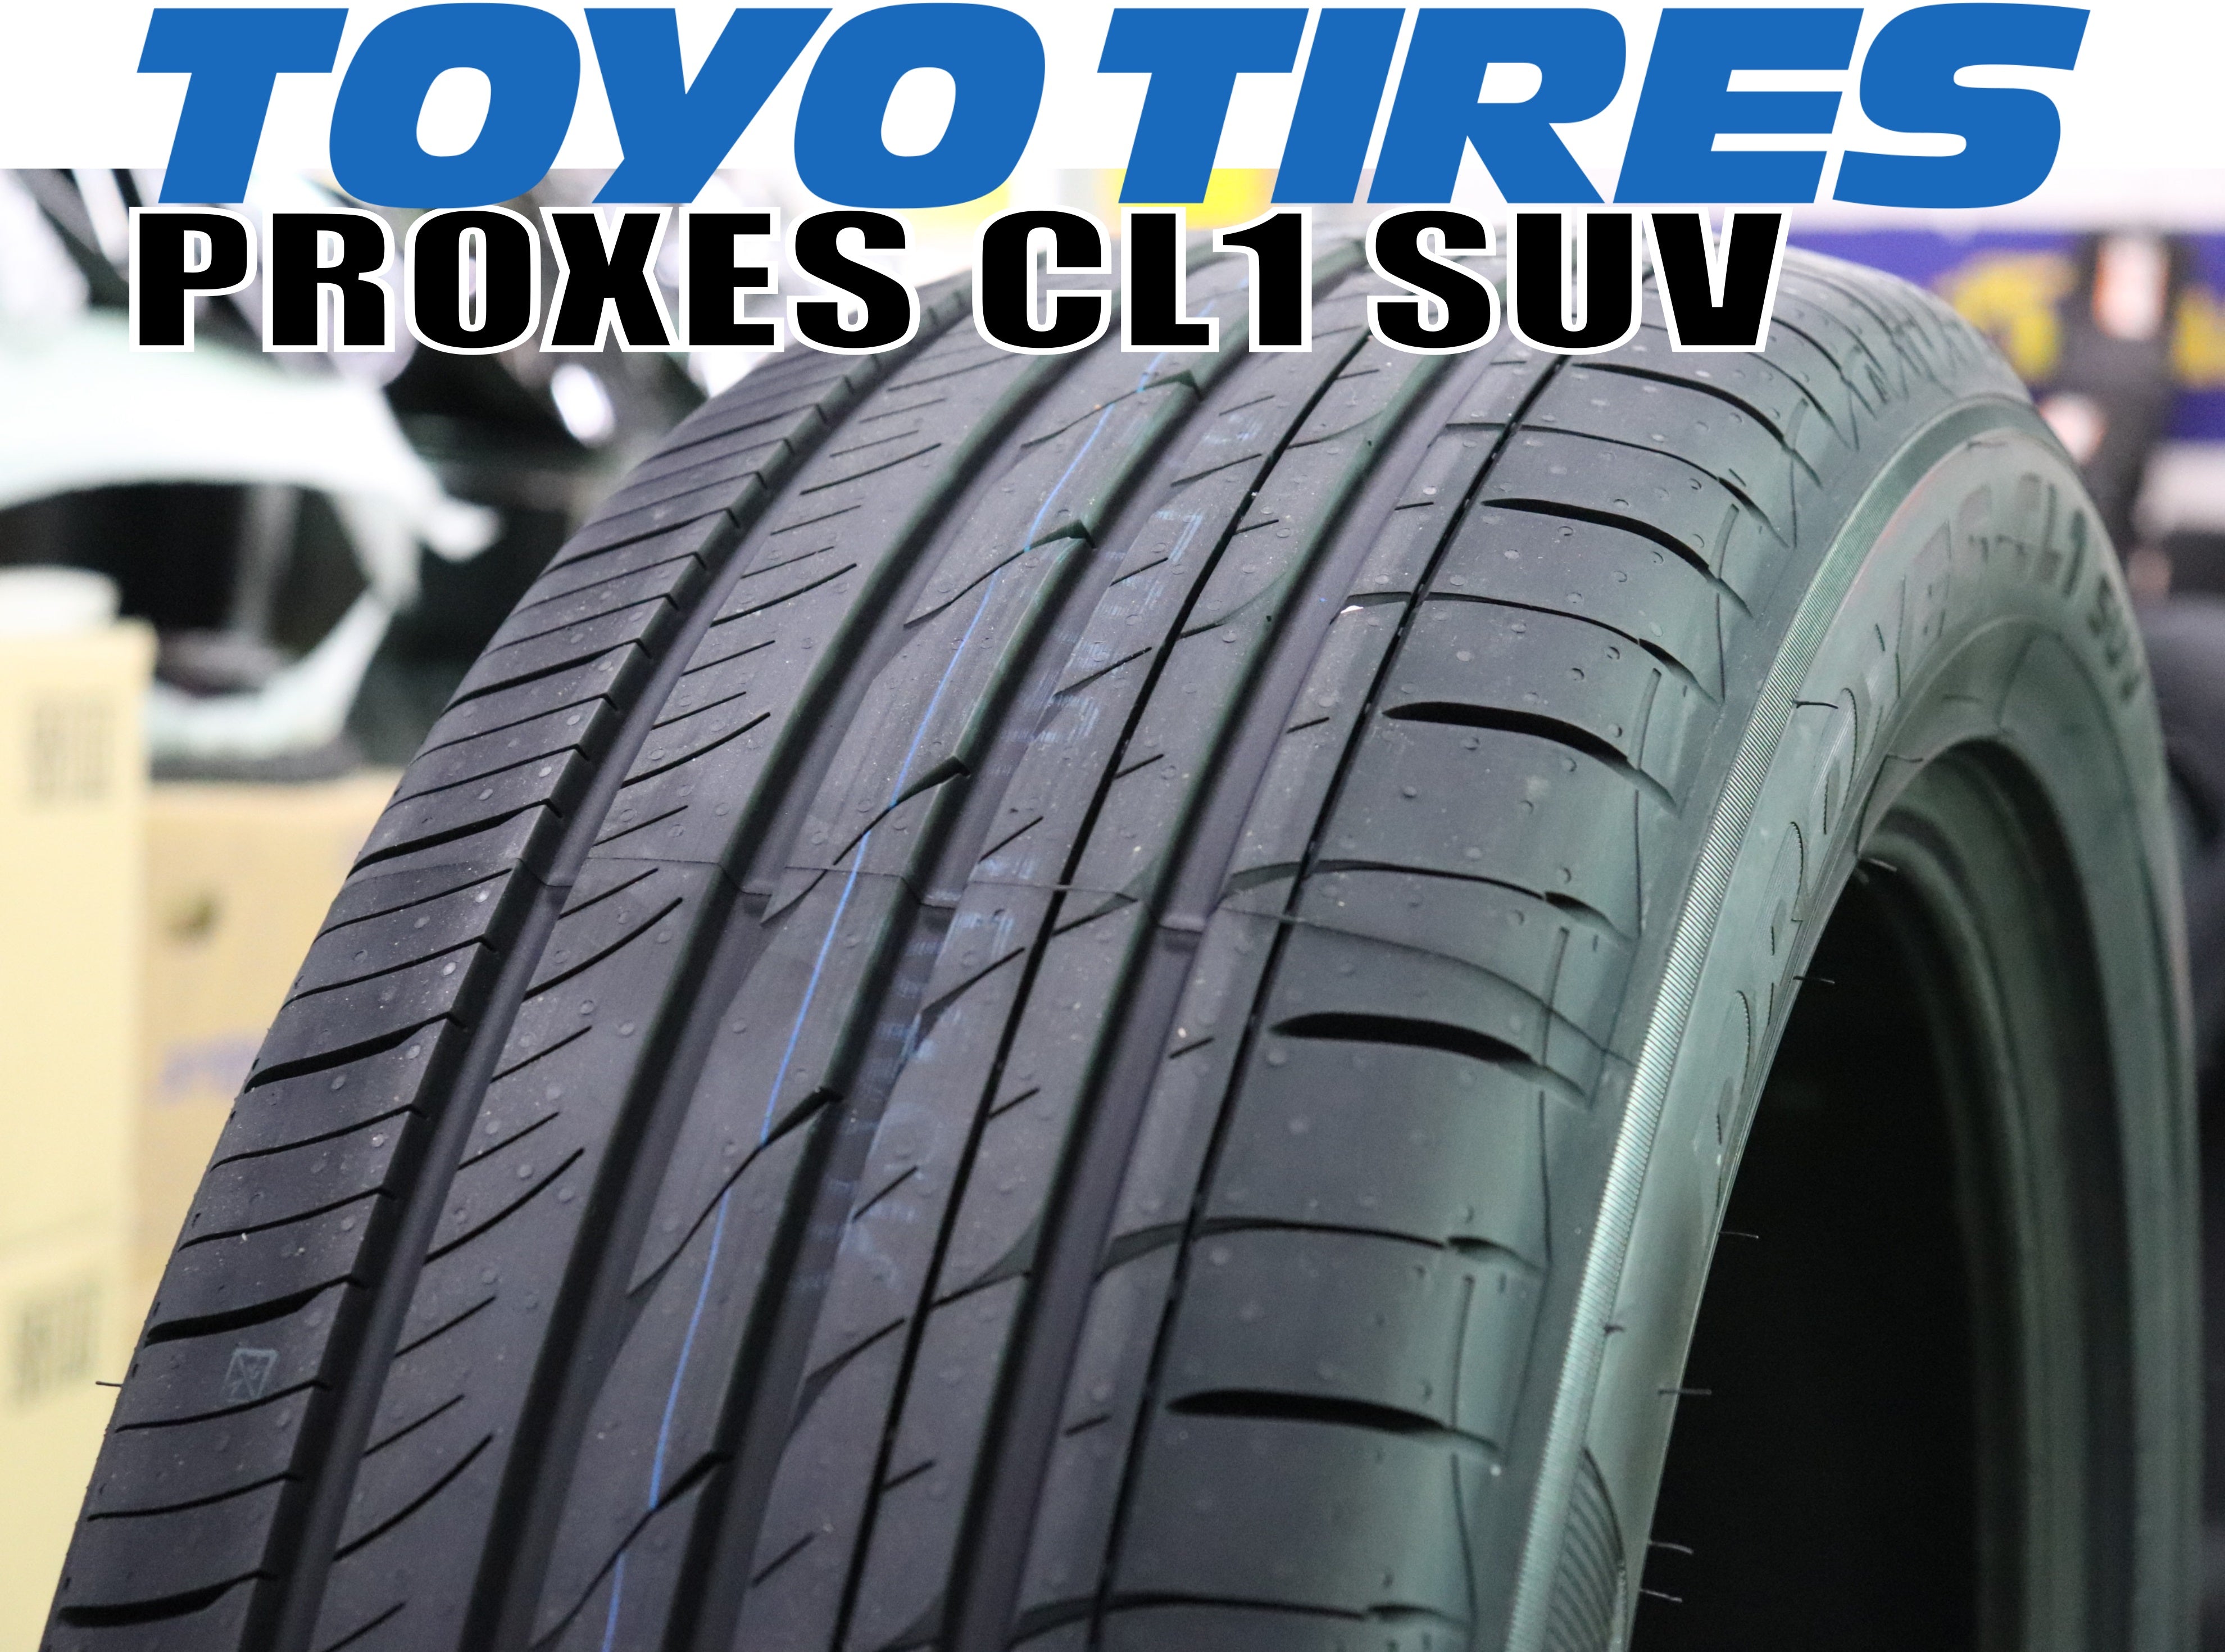 TOYO TIRES PROXES CL1SUV（トーヨー プロクセス） 225/60R17 99H 225/60-17